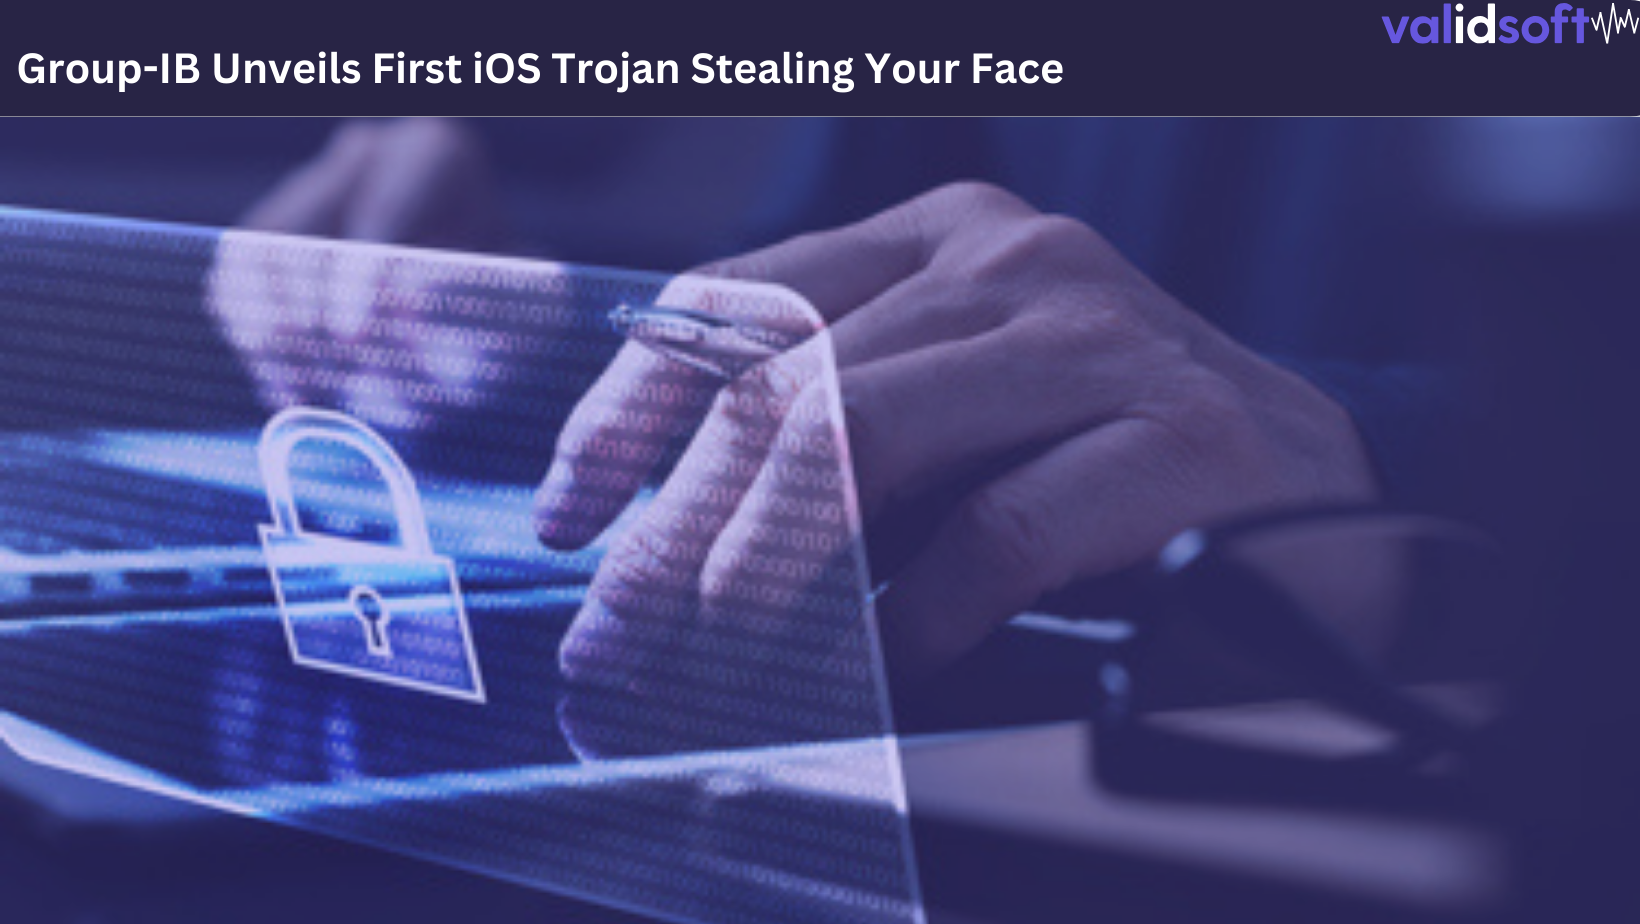 First iOS Trojan - How to Secure Identities